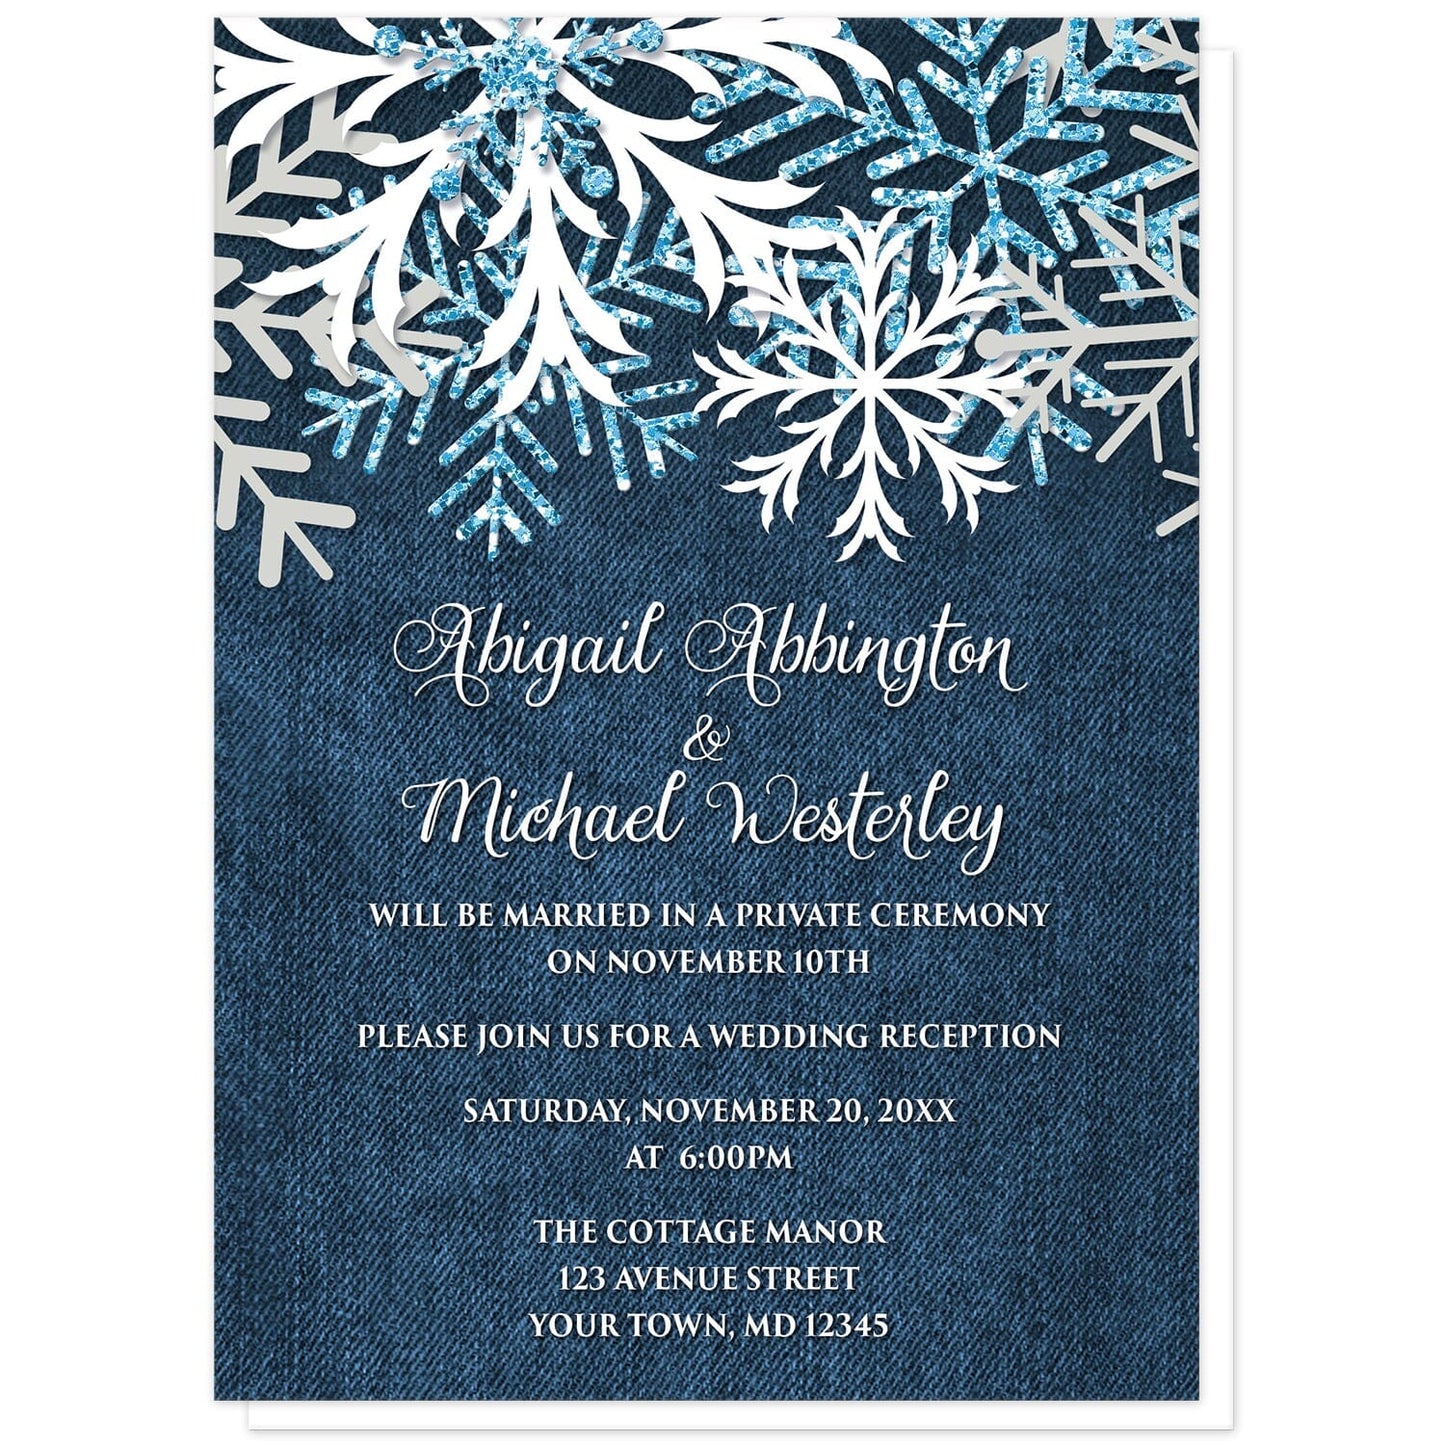 Rustic Snowflake Denim Winter Reception Only Invitations at Artistically Invited. Rustic snowflake denim winter reception only invitations with white, aqua blue glitter-illustrated, and light gray snowflakes along the top over a navy blue denim design. Your personalized post-wedding reception details are custom printed in white over the blue denim background below the pretty snowflakes.